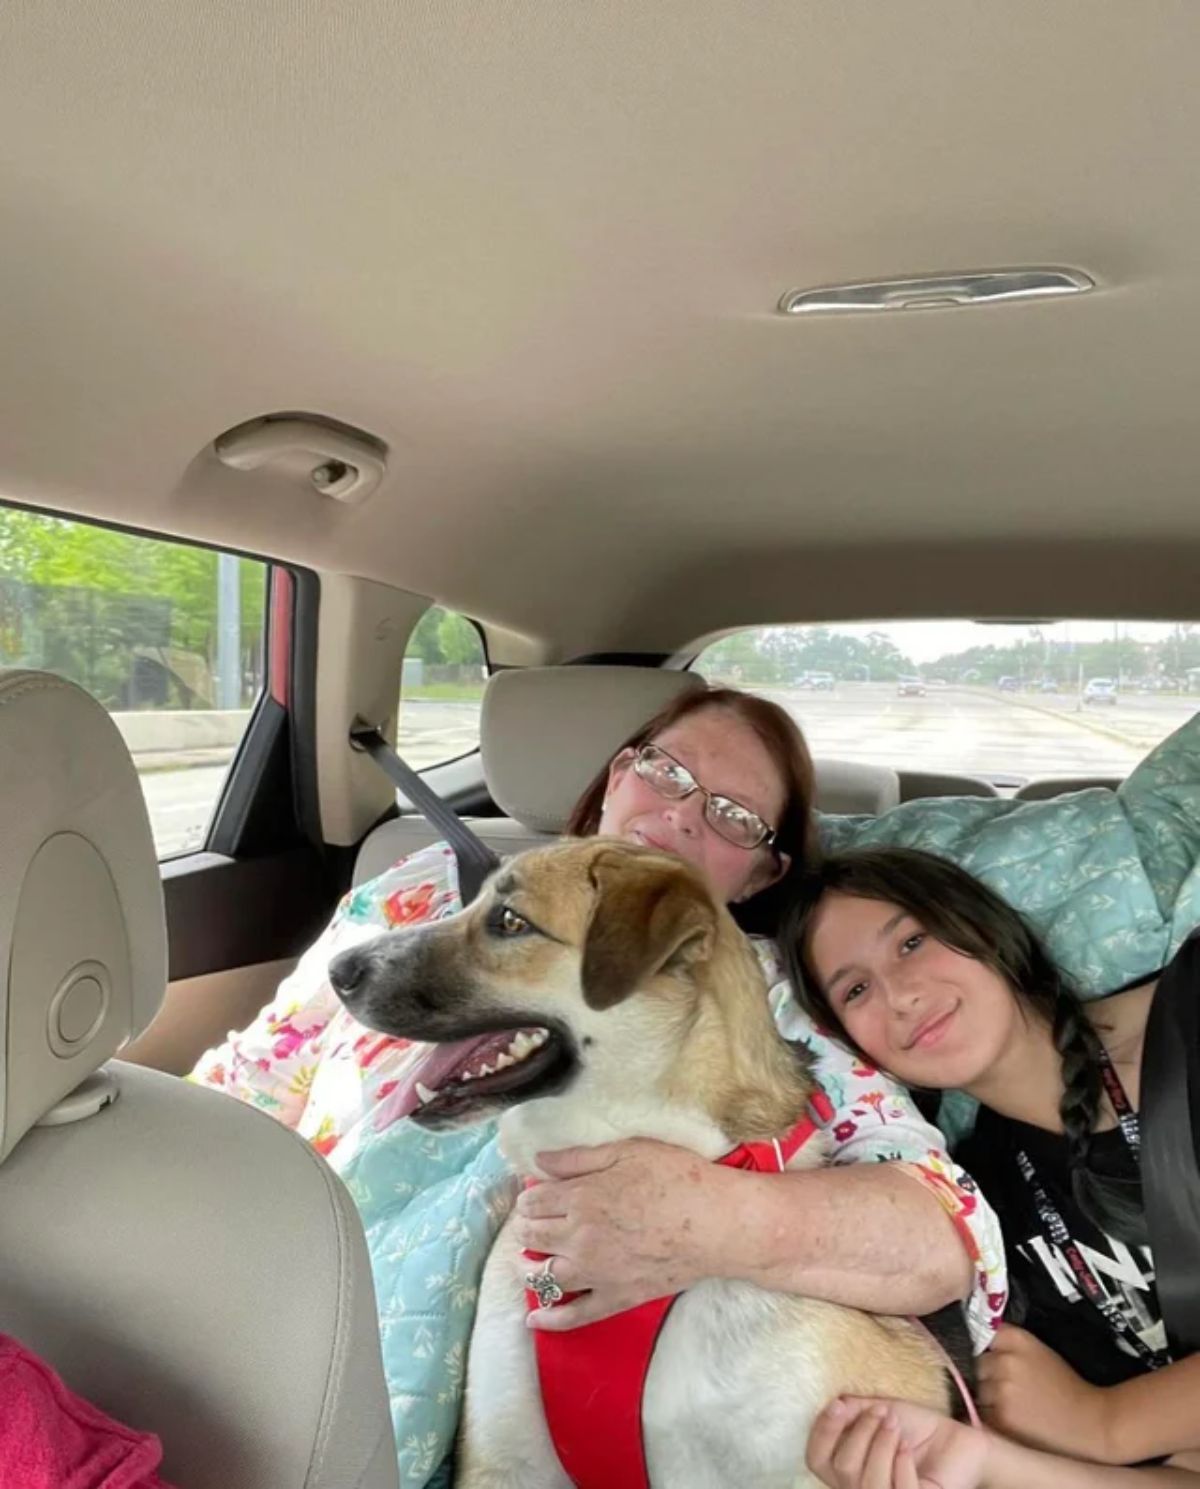 brown and white dog wearing a red harness in the back of a car being hugged by a woman and a girl